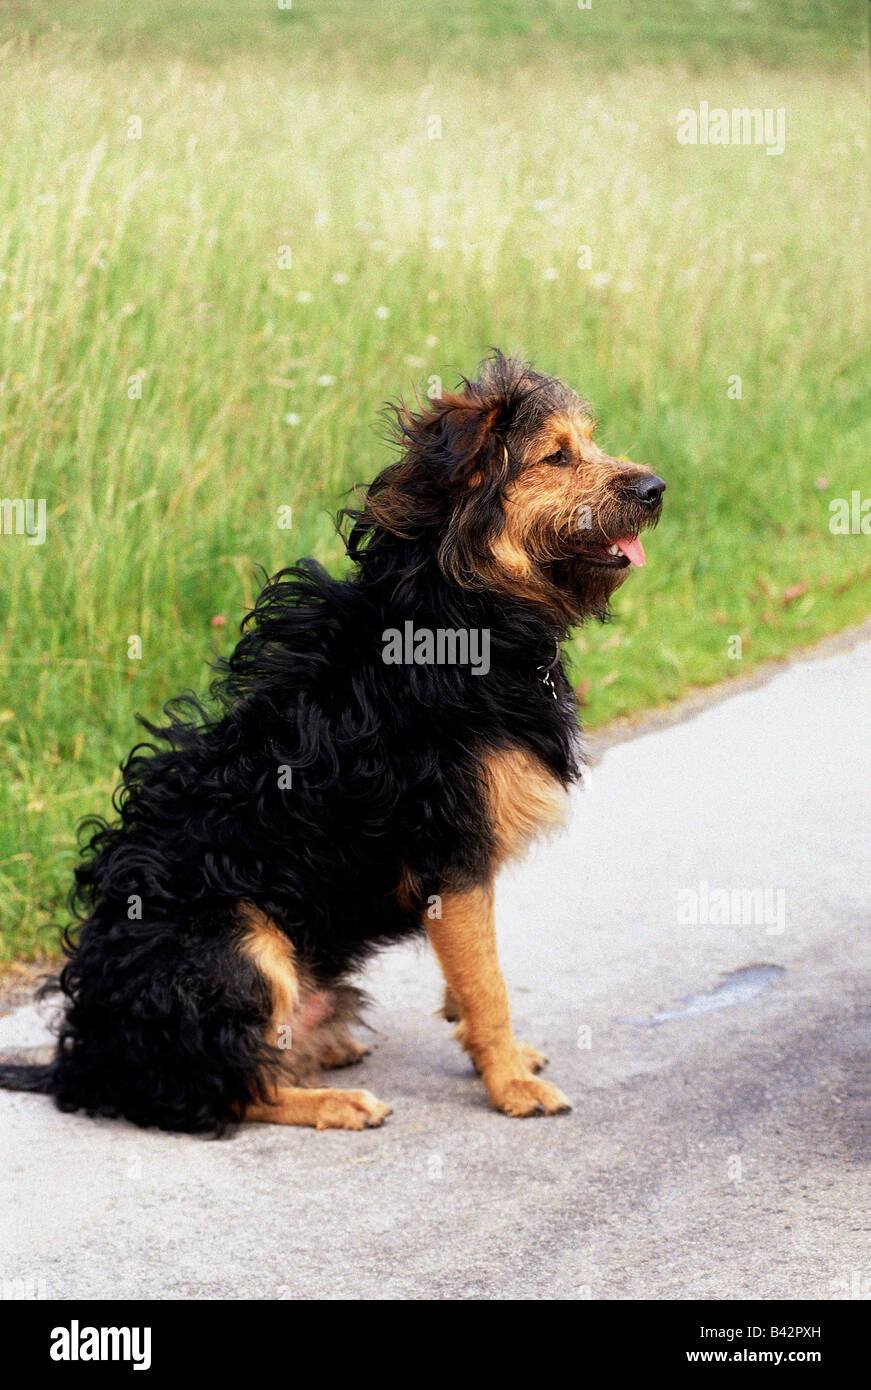 zoology / animals, mammal / mammalian, dogs, (Canis lupus familiaris), mixed-breed dog, one year old, sitting, side-view, side v Stock Photo